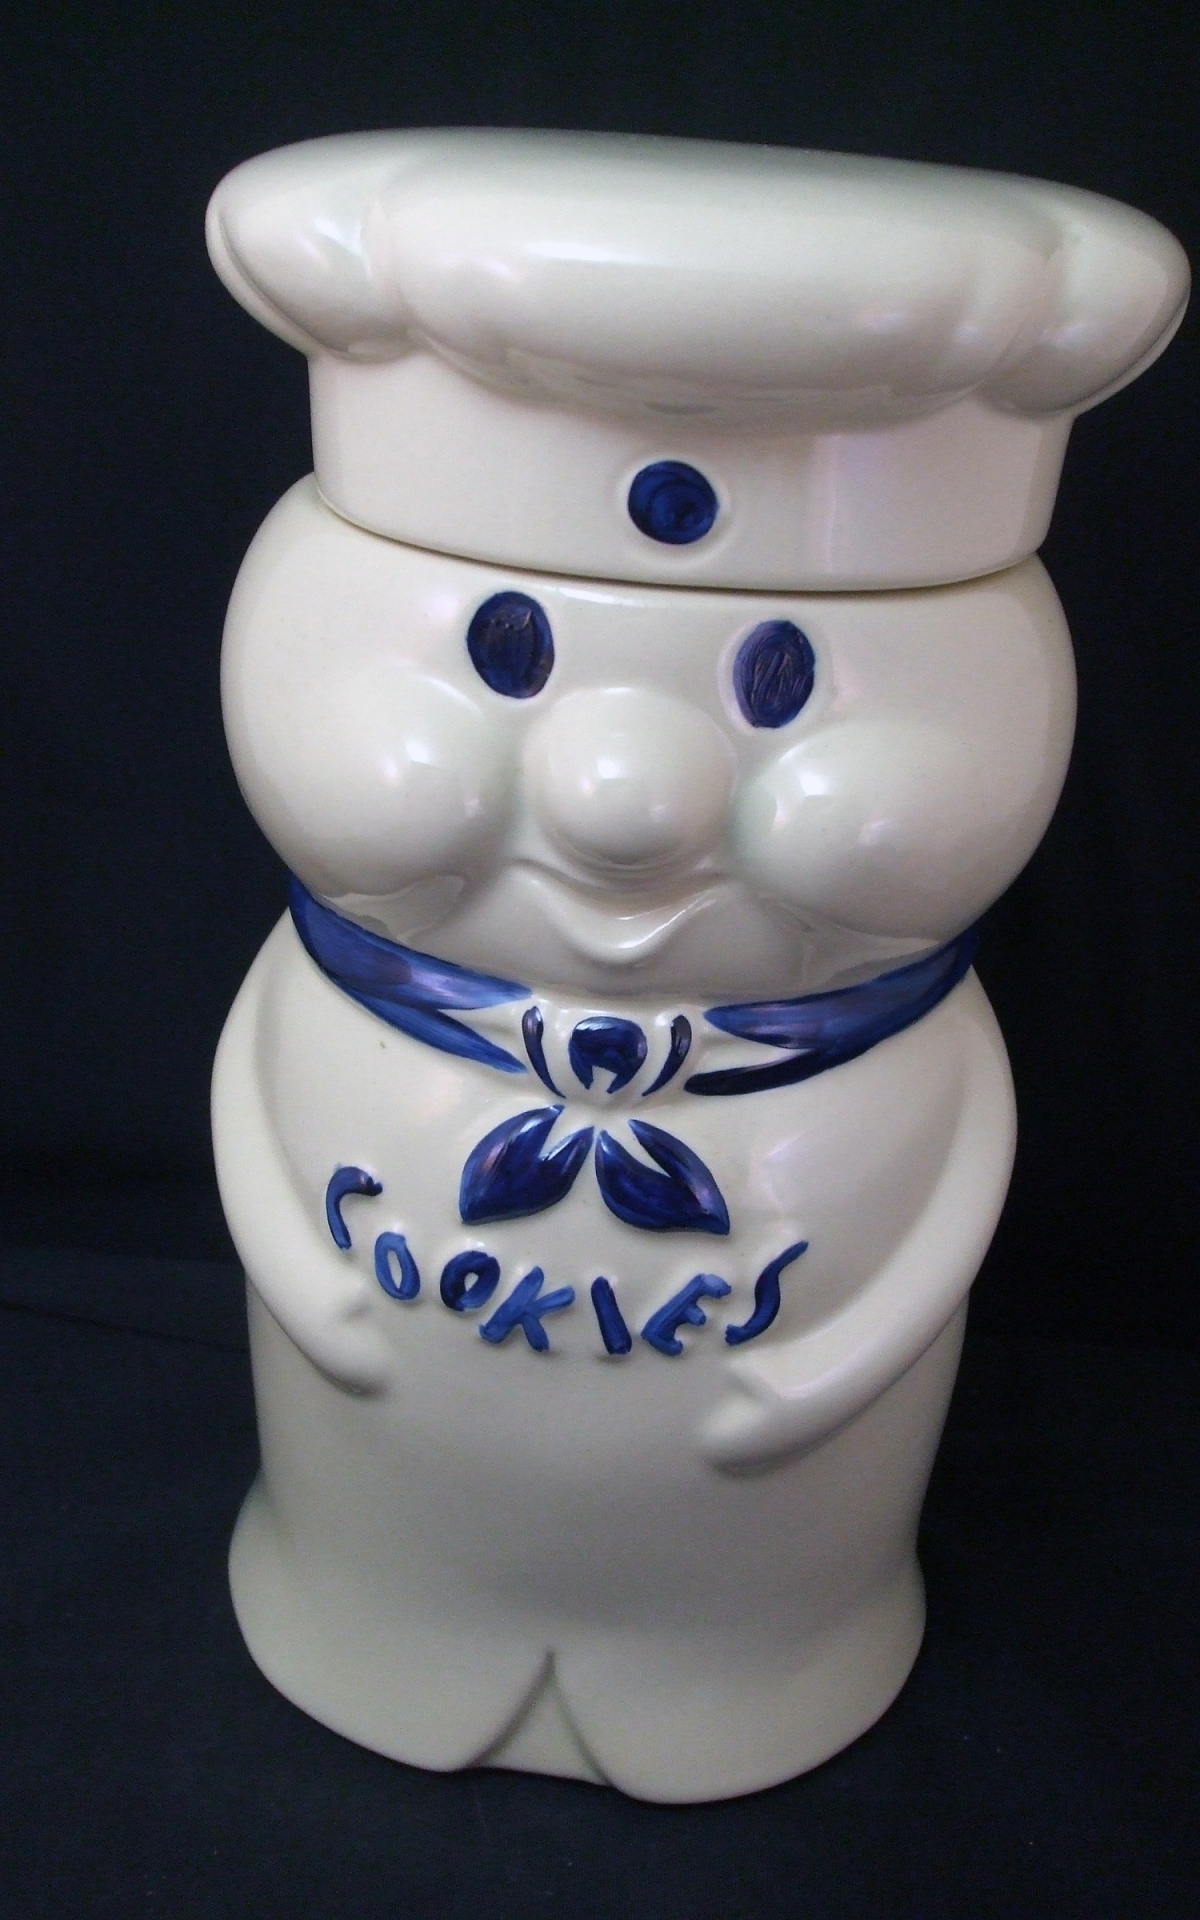 Free download Free download Pillsbury Doughboy Images ImagesExplore ...